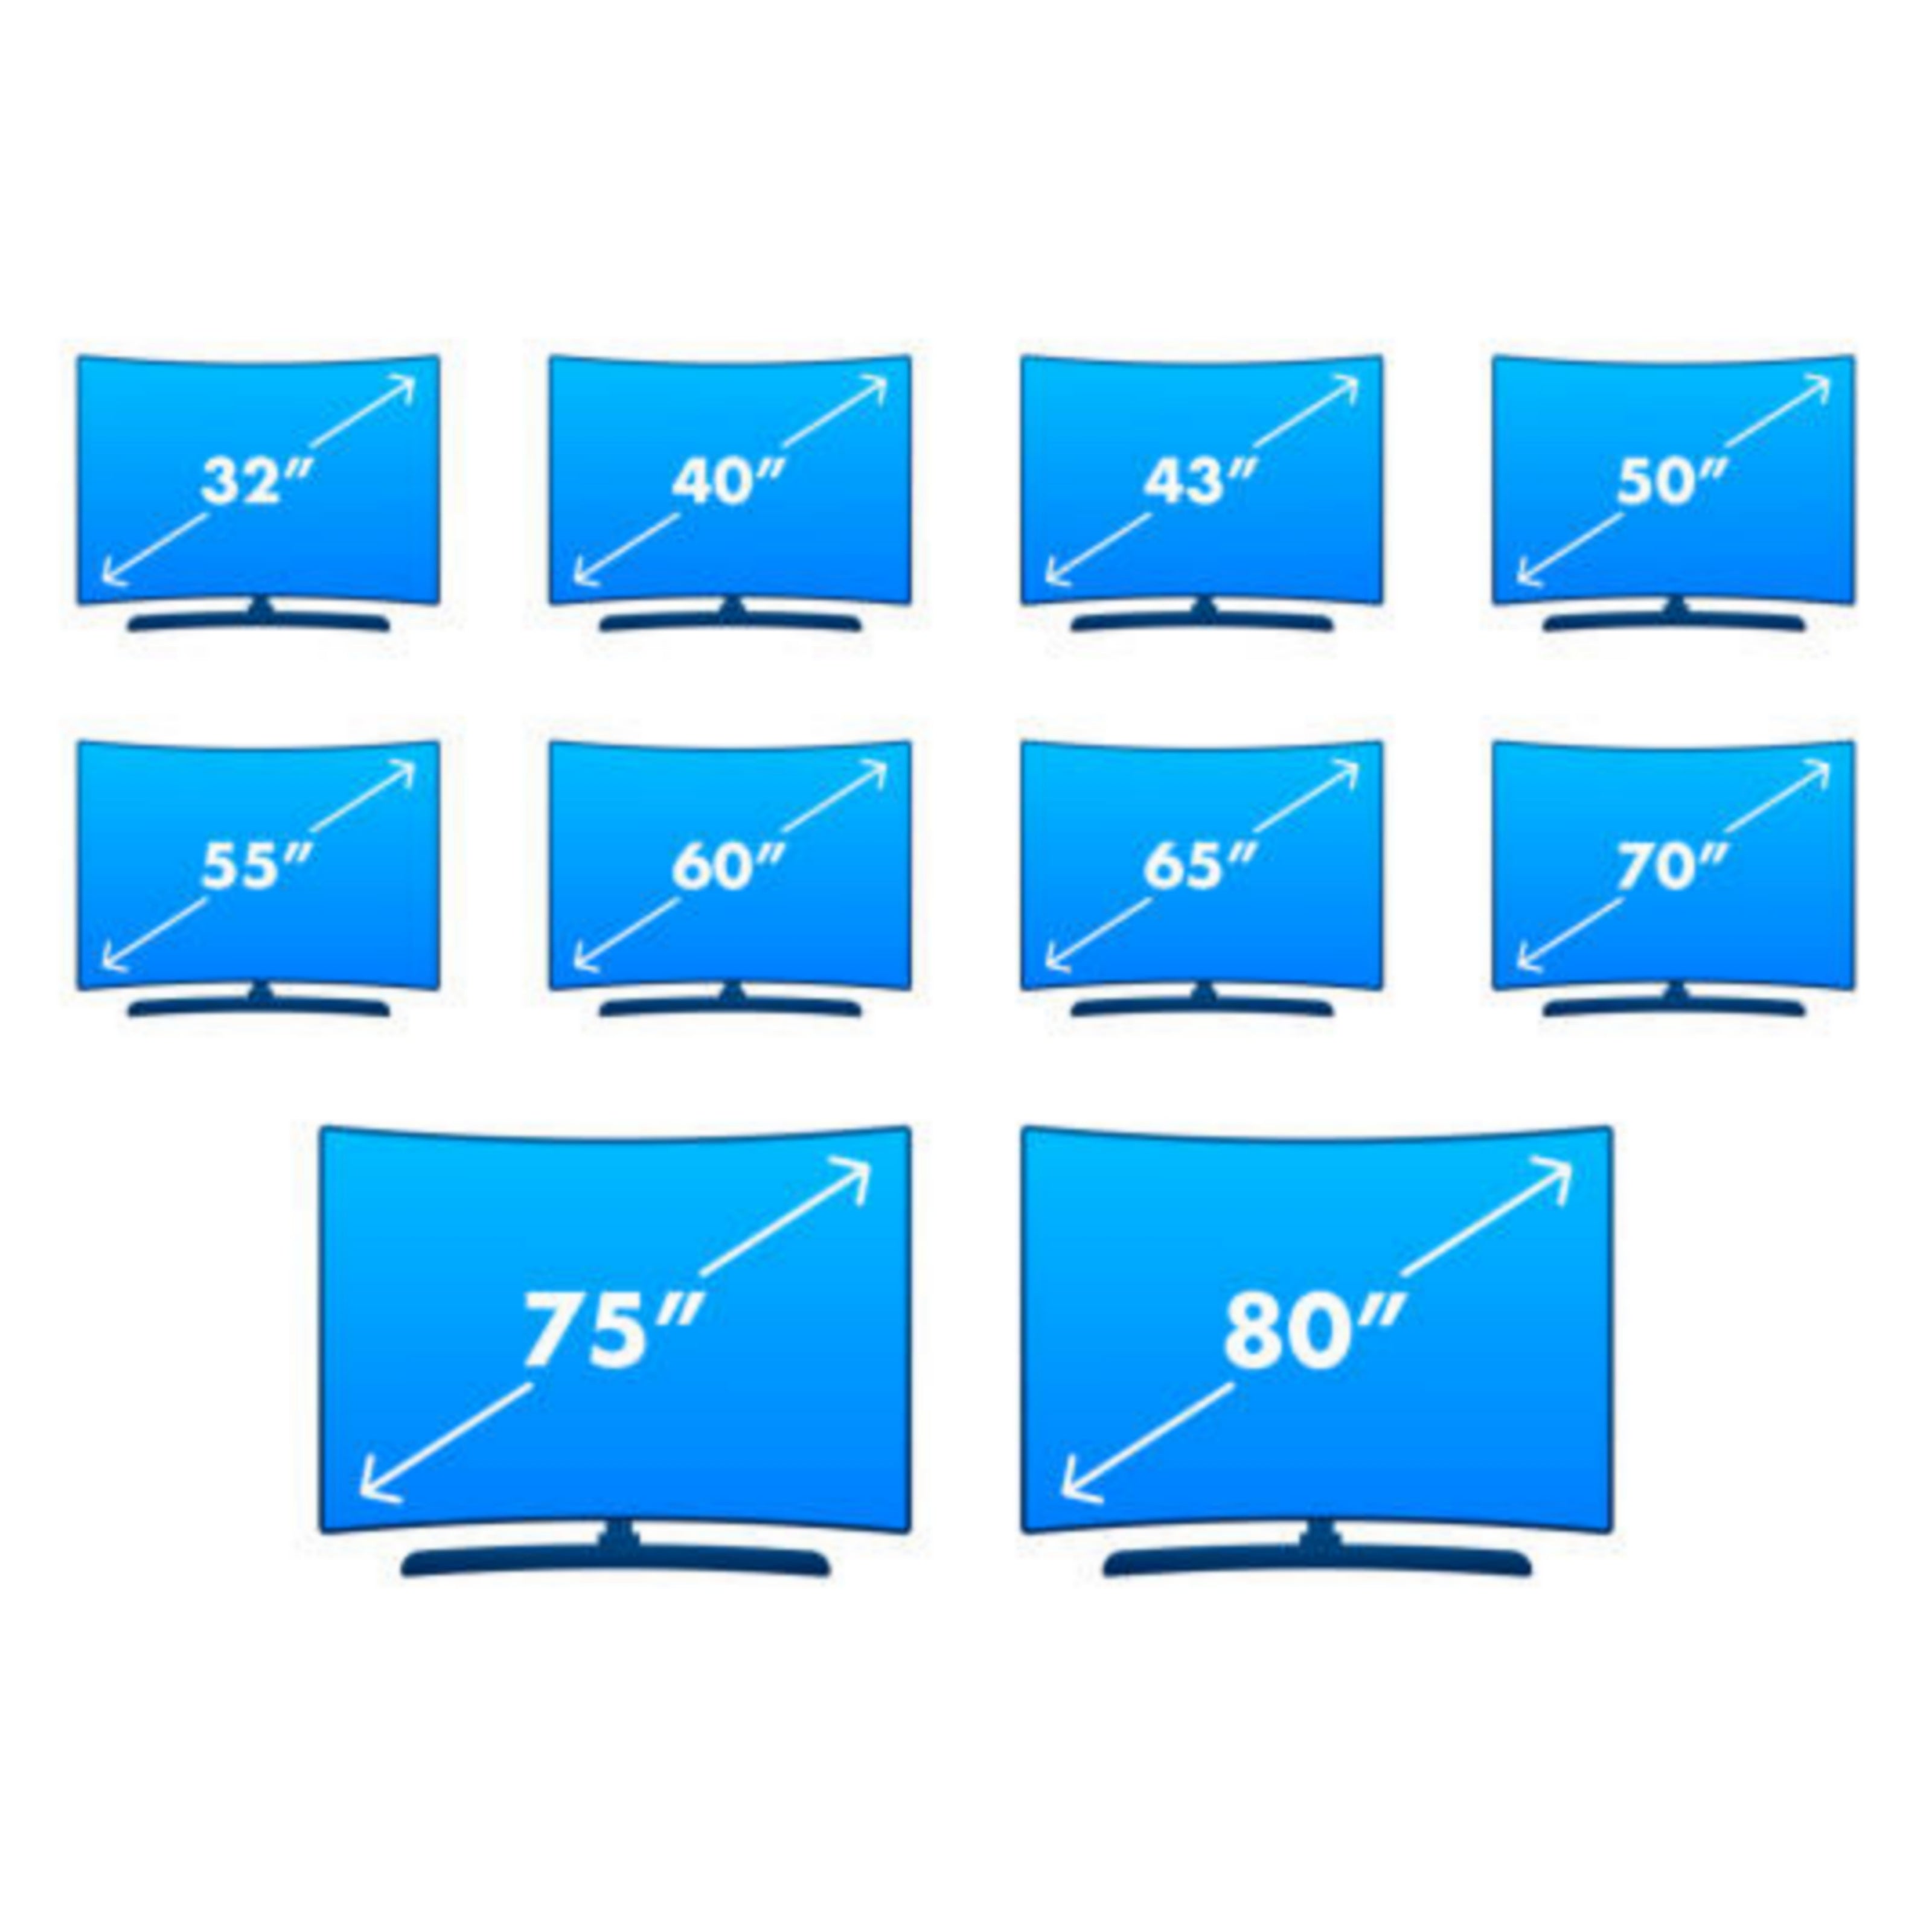 Shop new TV by size